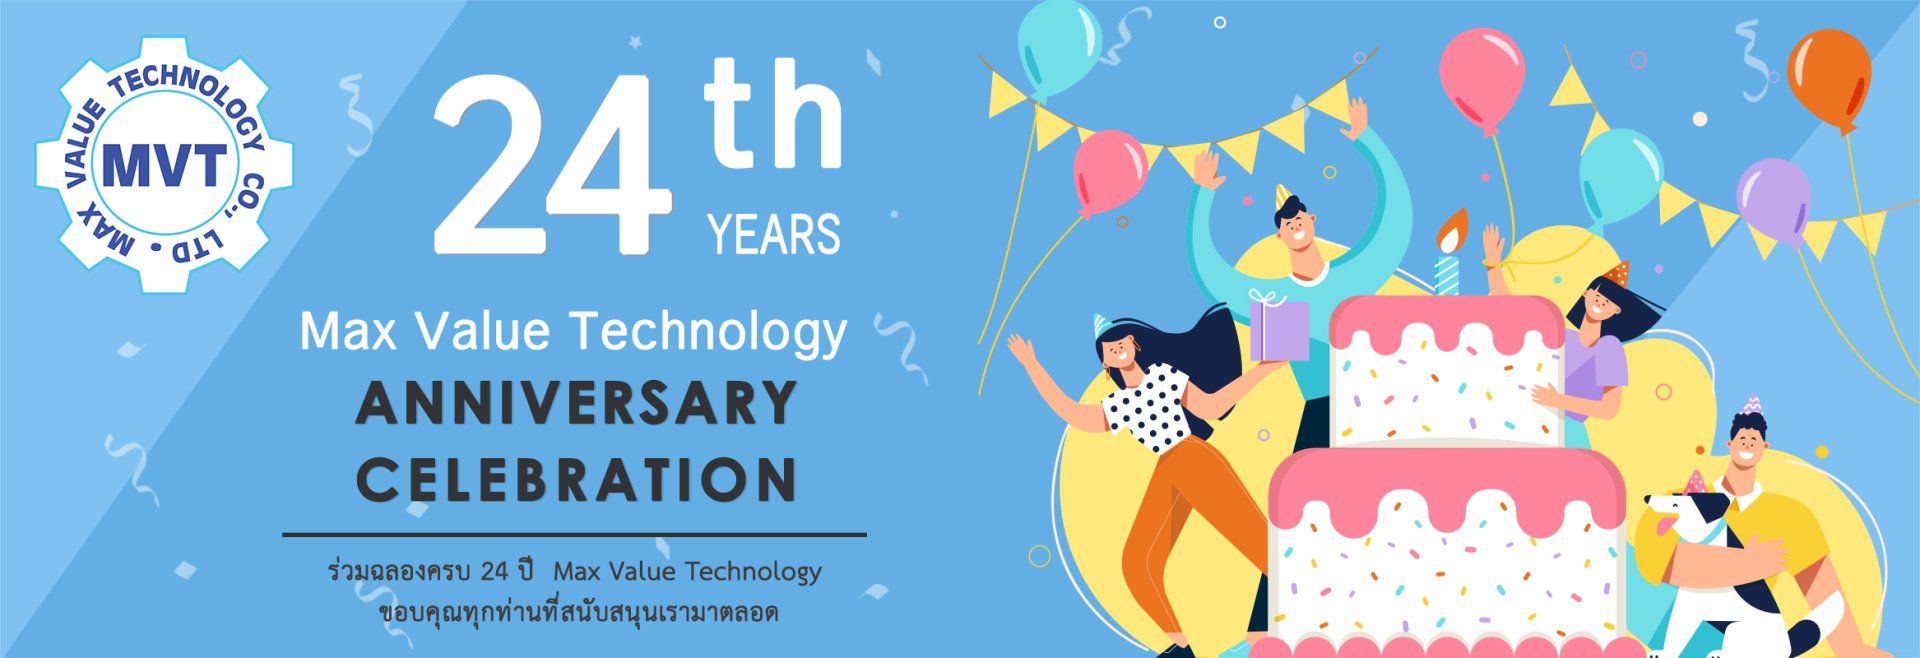 24th Anniversary of Max Value Technology